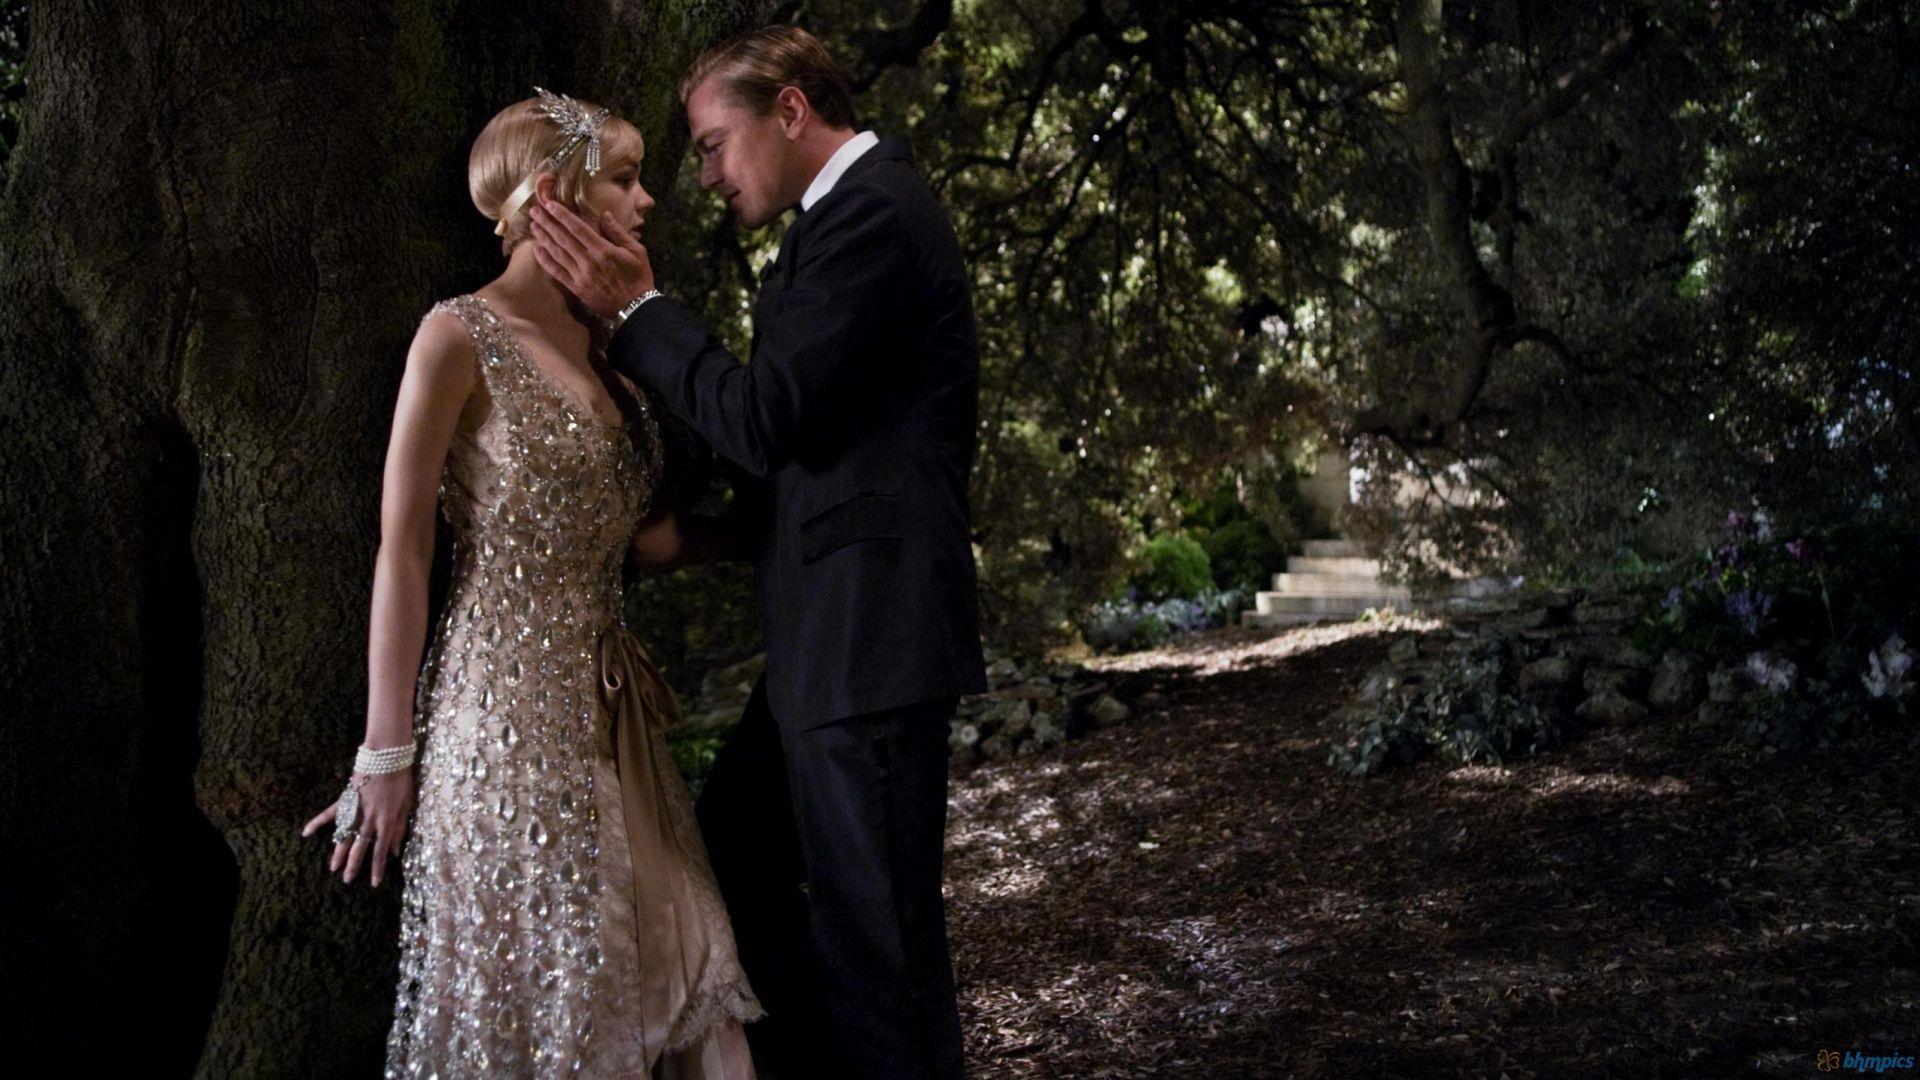 The Great Gatsby image Gatsby 2013 HD wallpaper and background